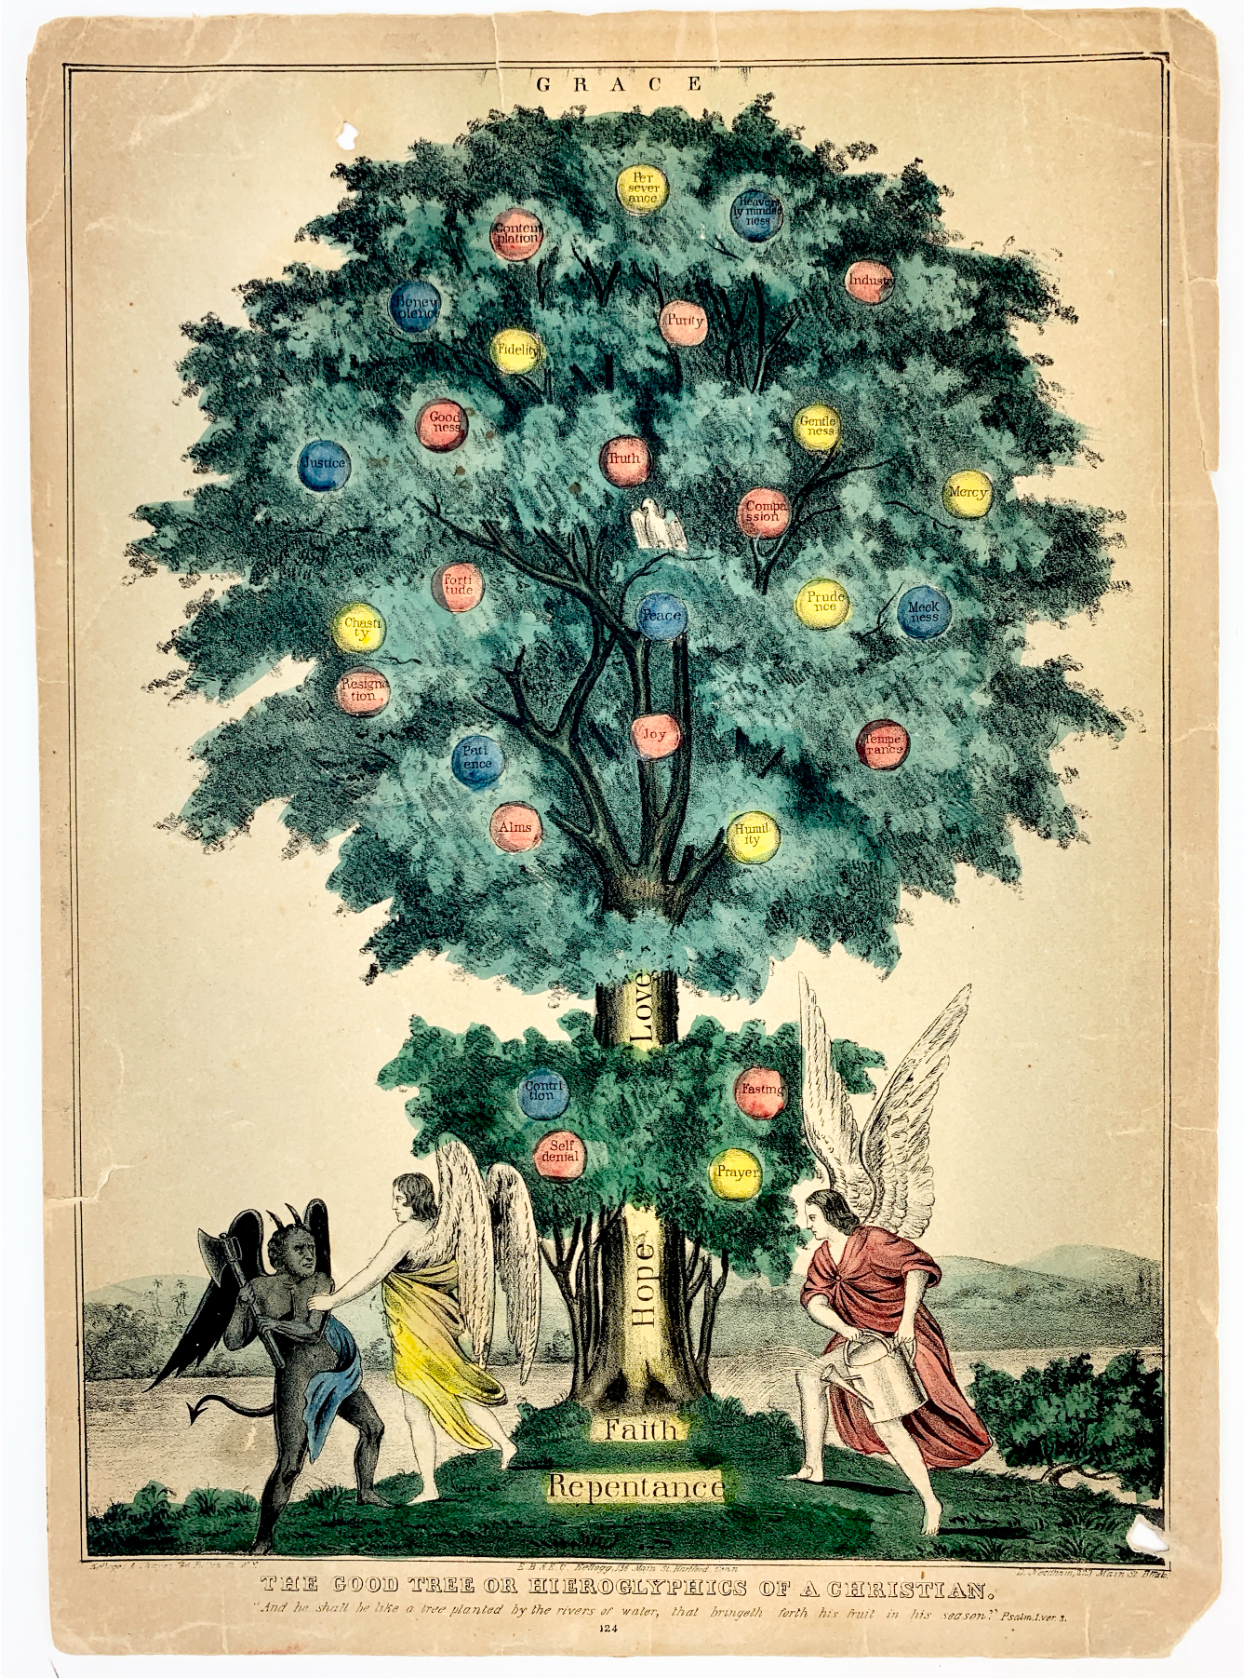 [Tree of Life] "The Good Tree or Hieroglyphics of a Christian" – 19th Century Colored Lithograph